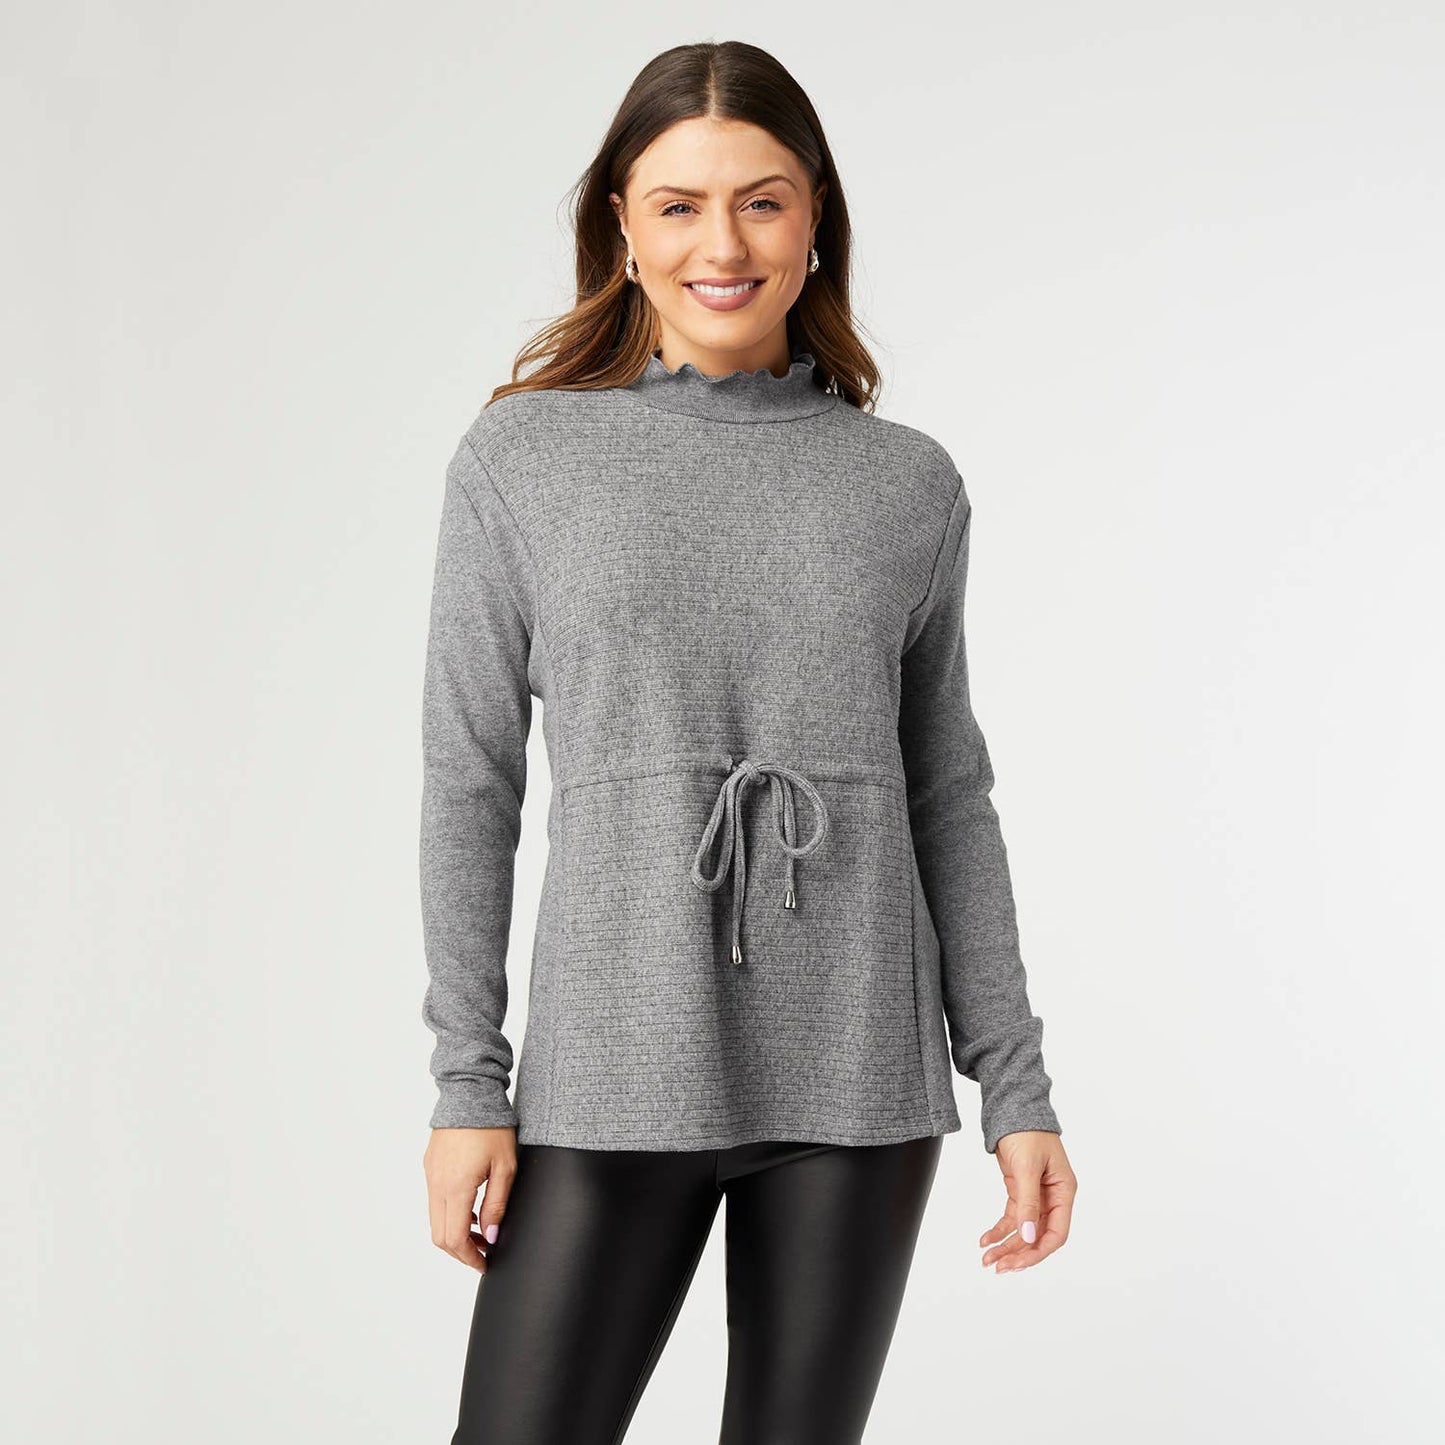 Charity Knit Top with Drawstring Waist: L/XL / Mid Heather Grey